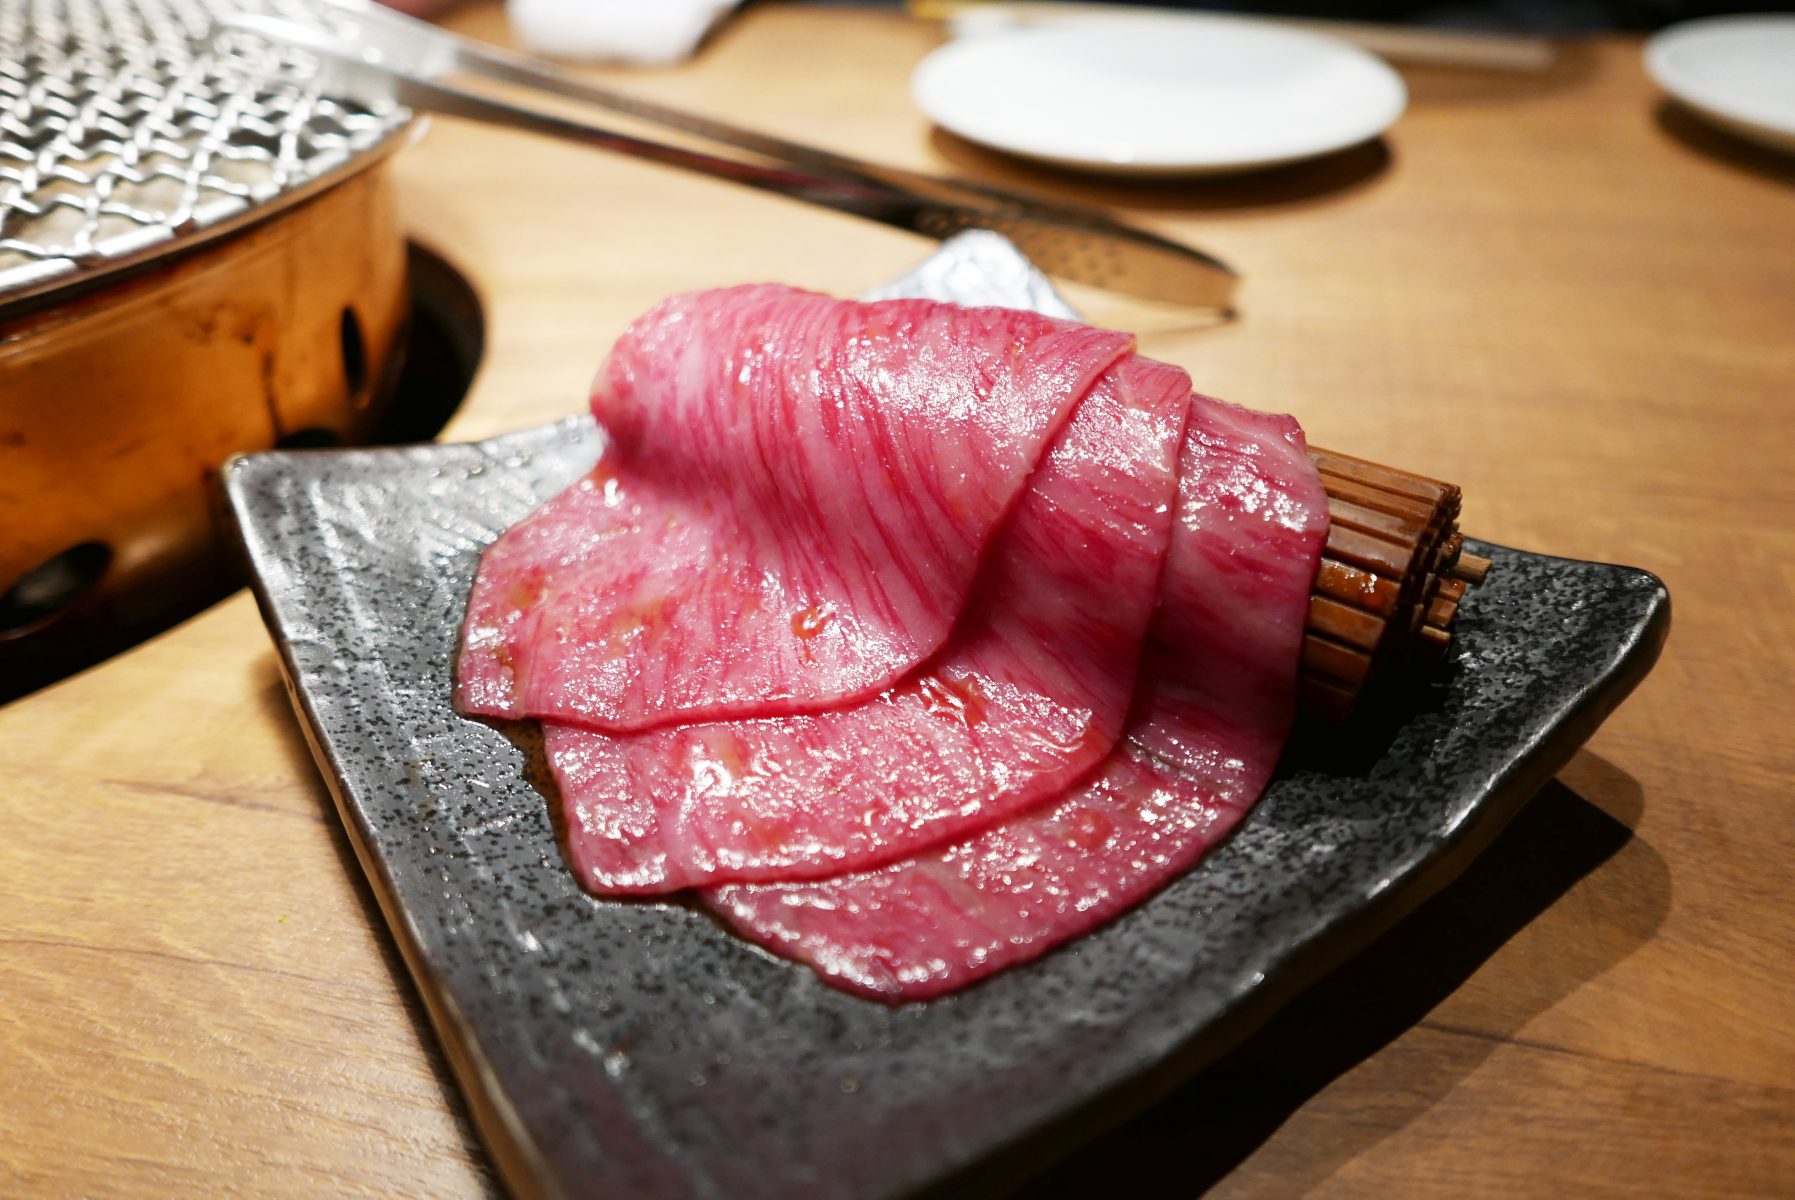 Sirloin ready to be grilled (few seconds on each side) at Yakiniku Nakahara,Tokyo.